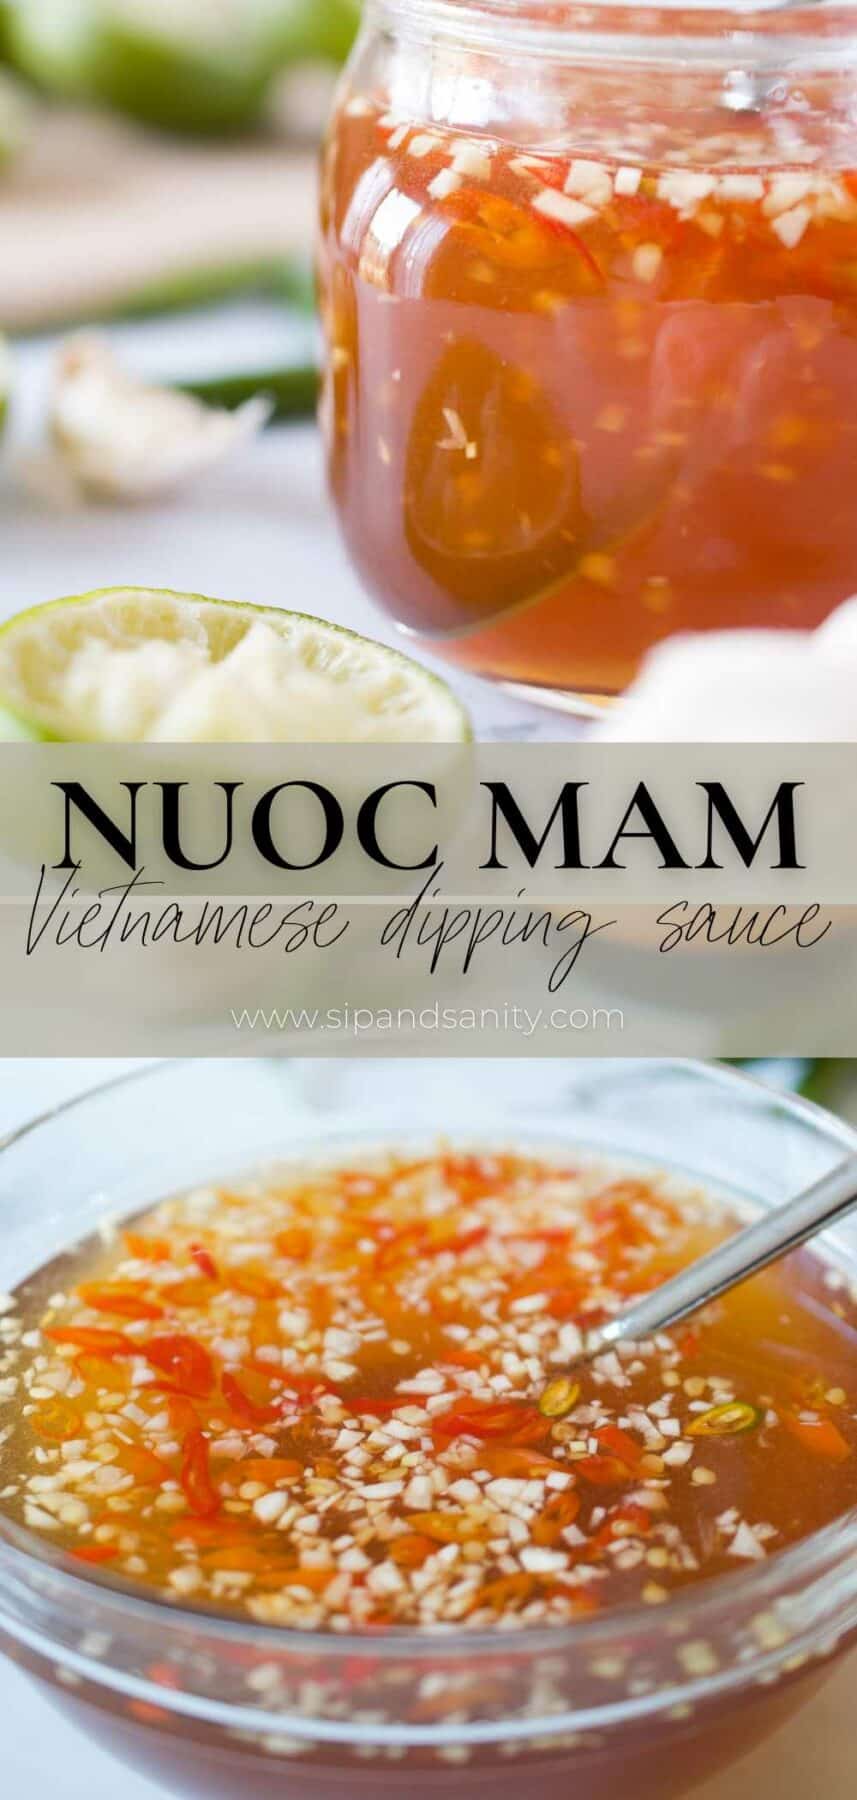 Pin image for nuoc mam vietnamese dipping sauce.